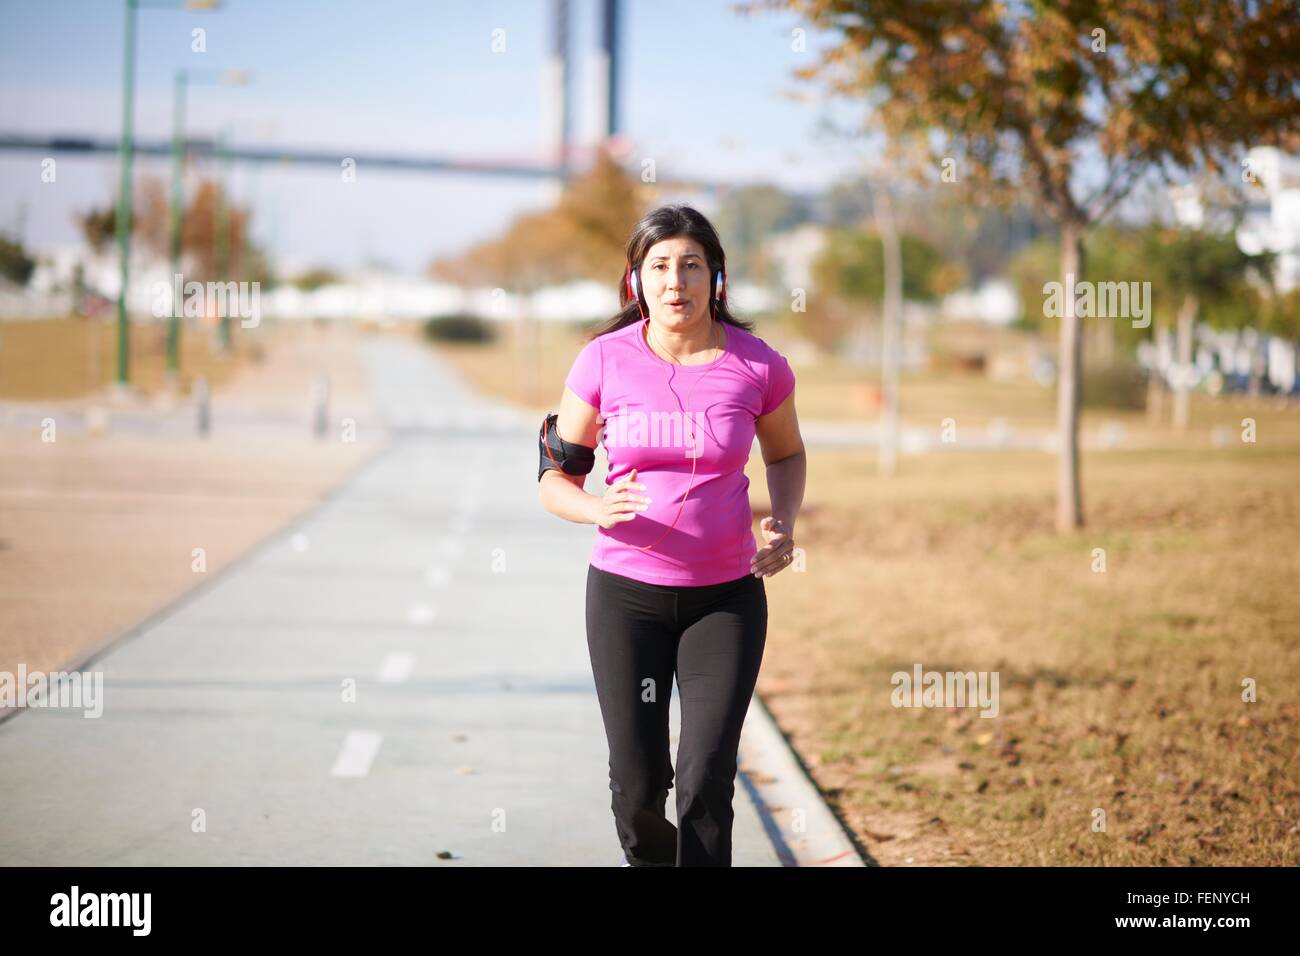 Front view of mature woman wearing headphones and armband jogging on pathway Stock Photo